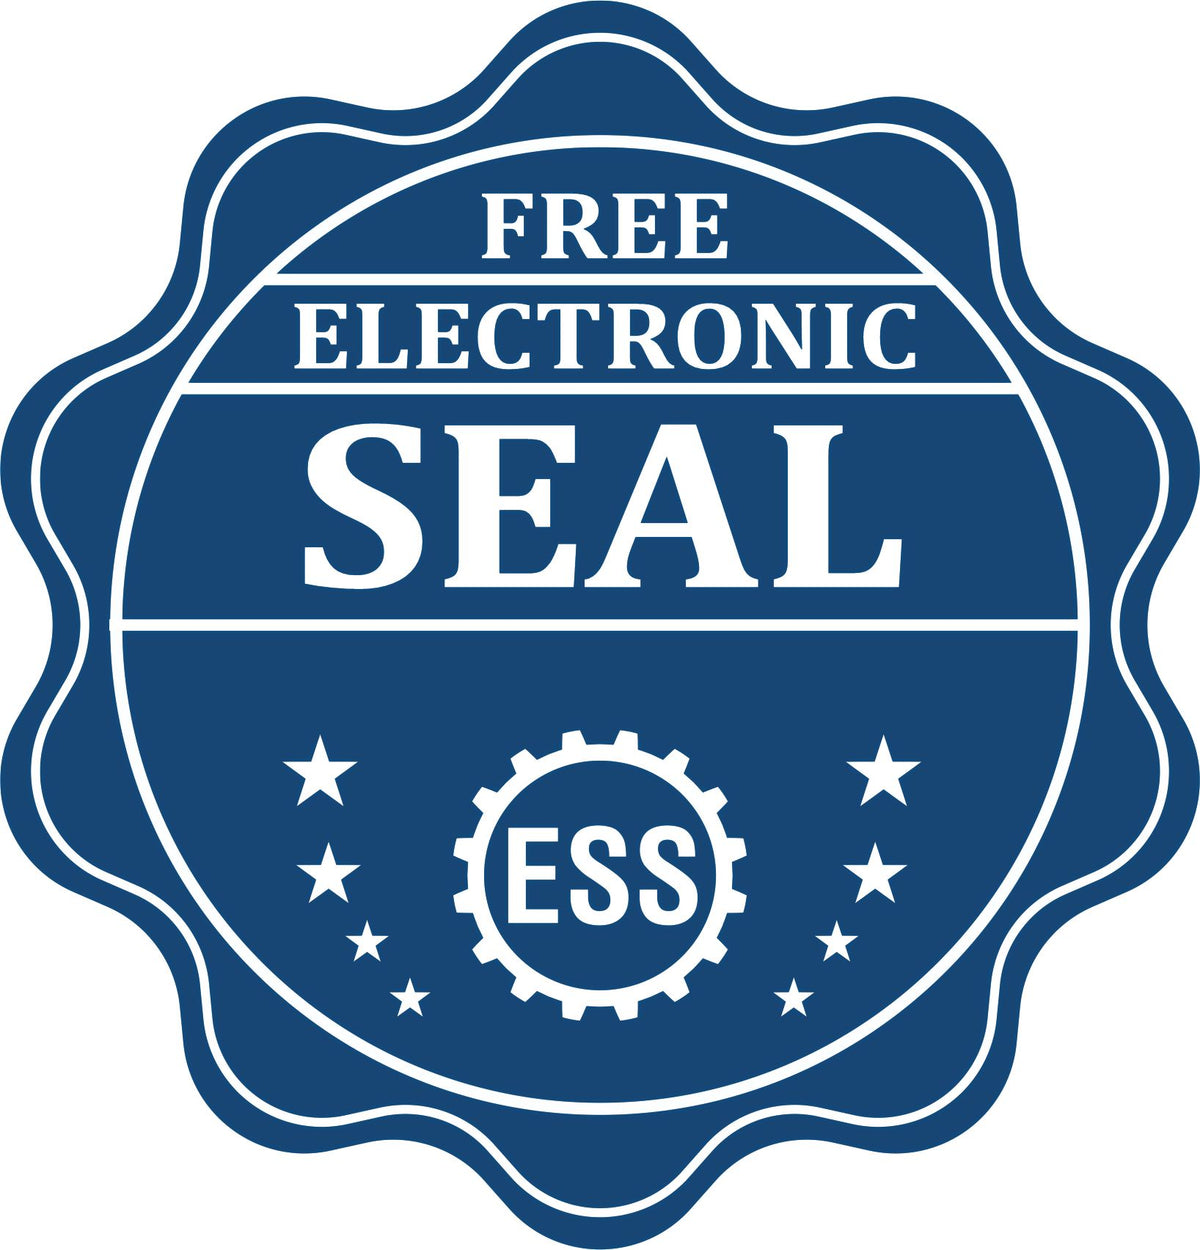 A badge showing a free electronic seal for the Hybrid Washington Engineer Seal with stars and the ESS gear on the emblem.